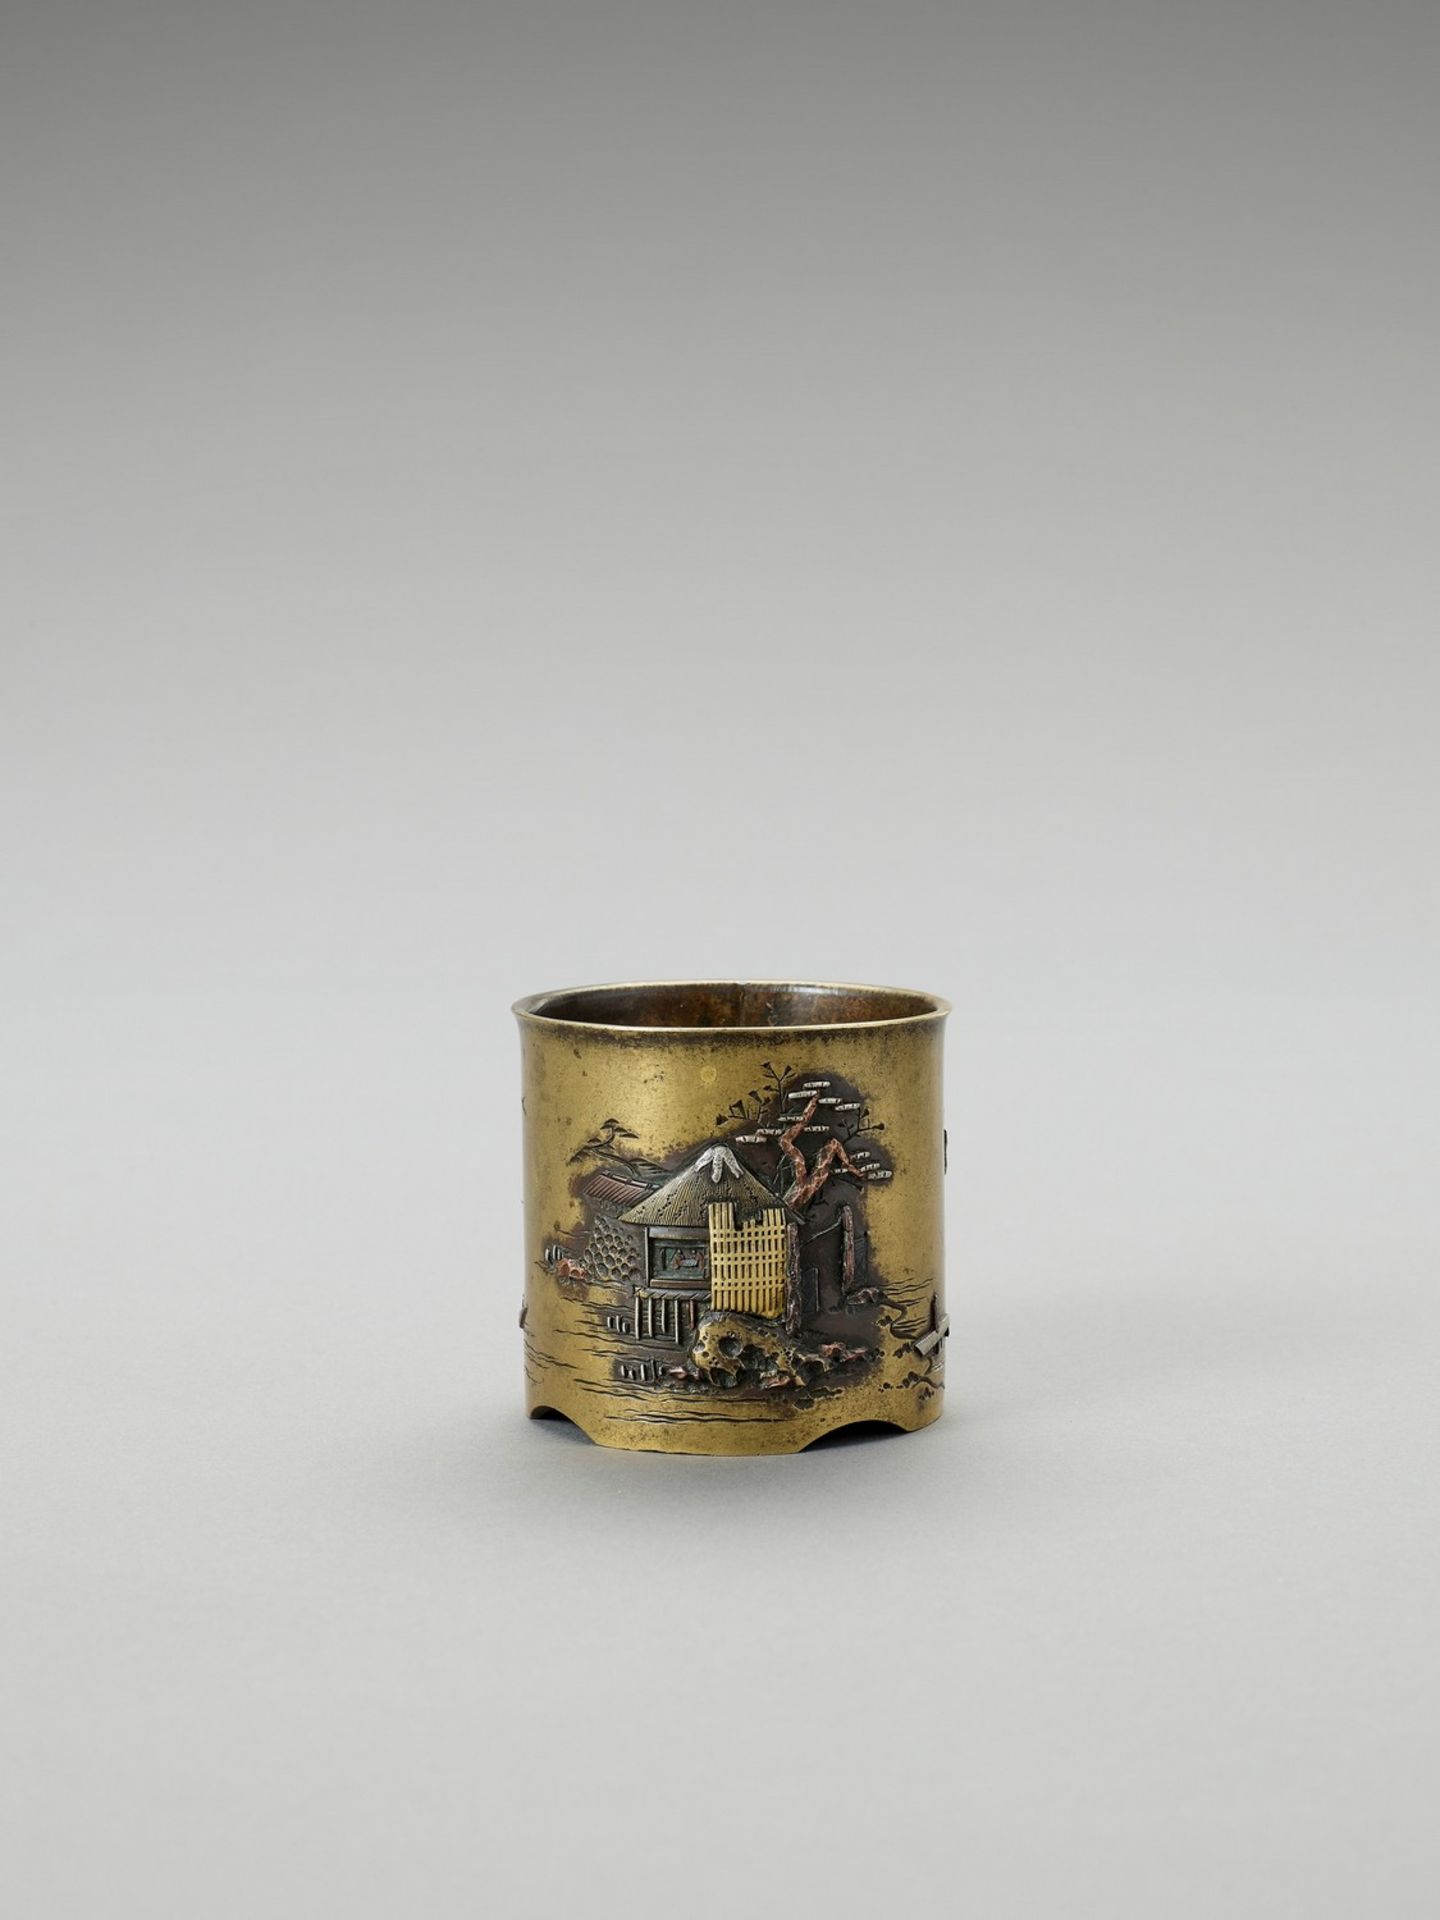 A SMALL SENTOKU VESSEL WITH SILVER AND COPPER INLAYS